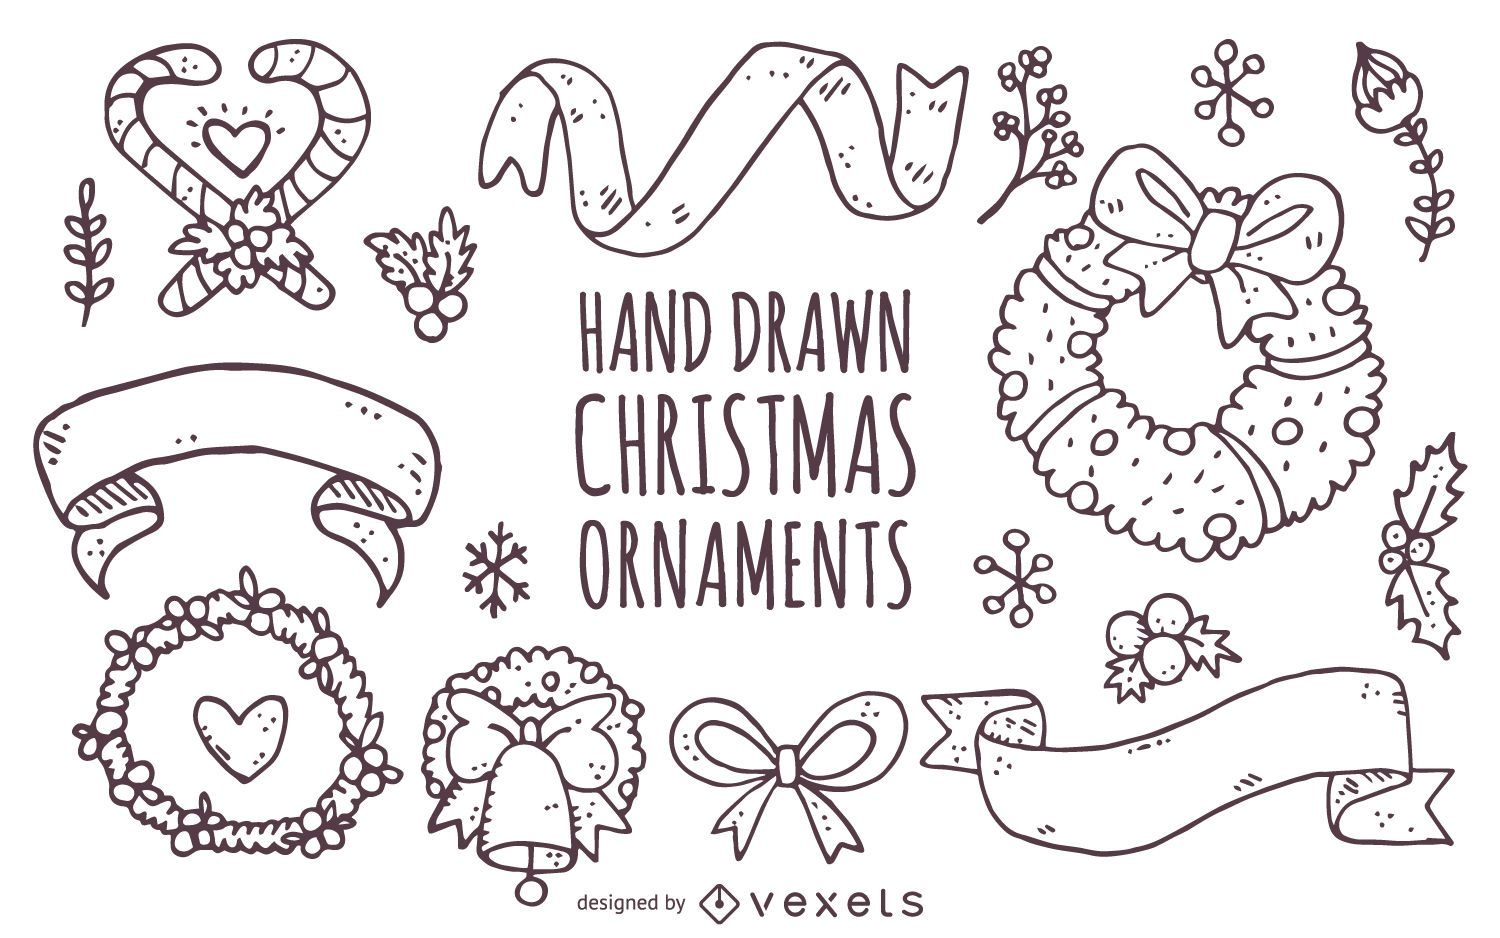 Hand drawn Christmas ornaments collection